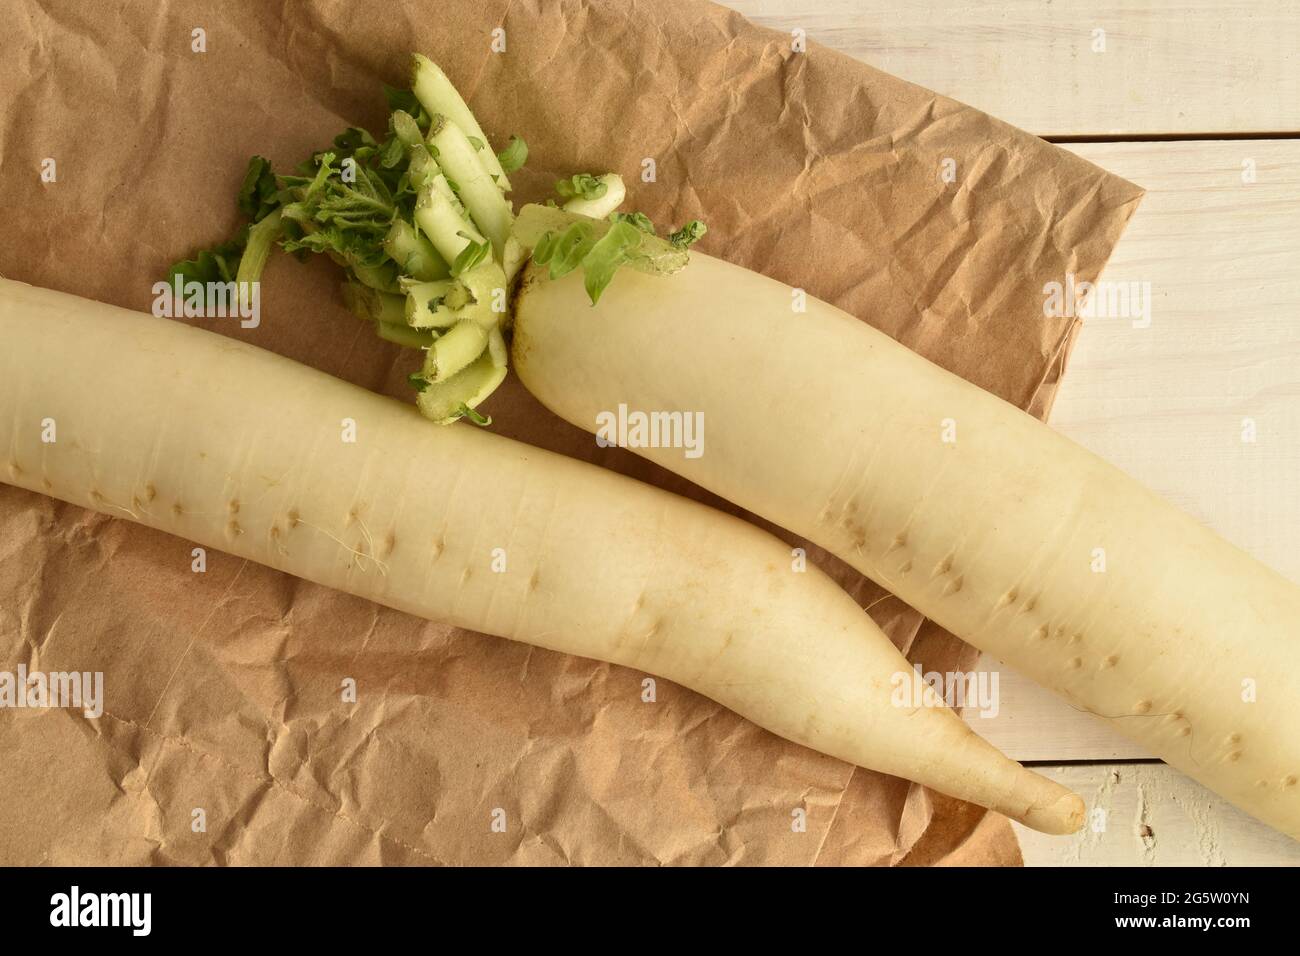 Two ripe organic radishes on brown paper, close-up, on a white wooden table, top view. Stock Photo